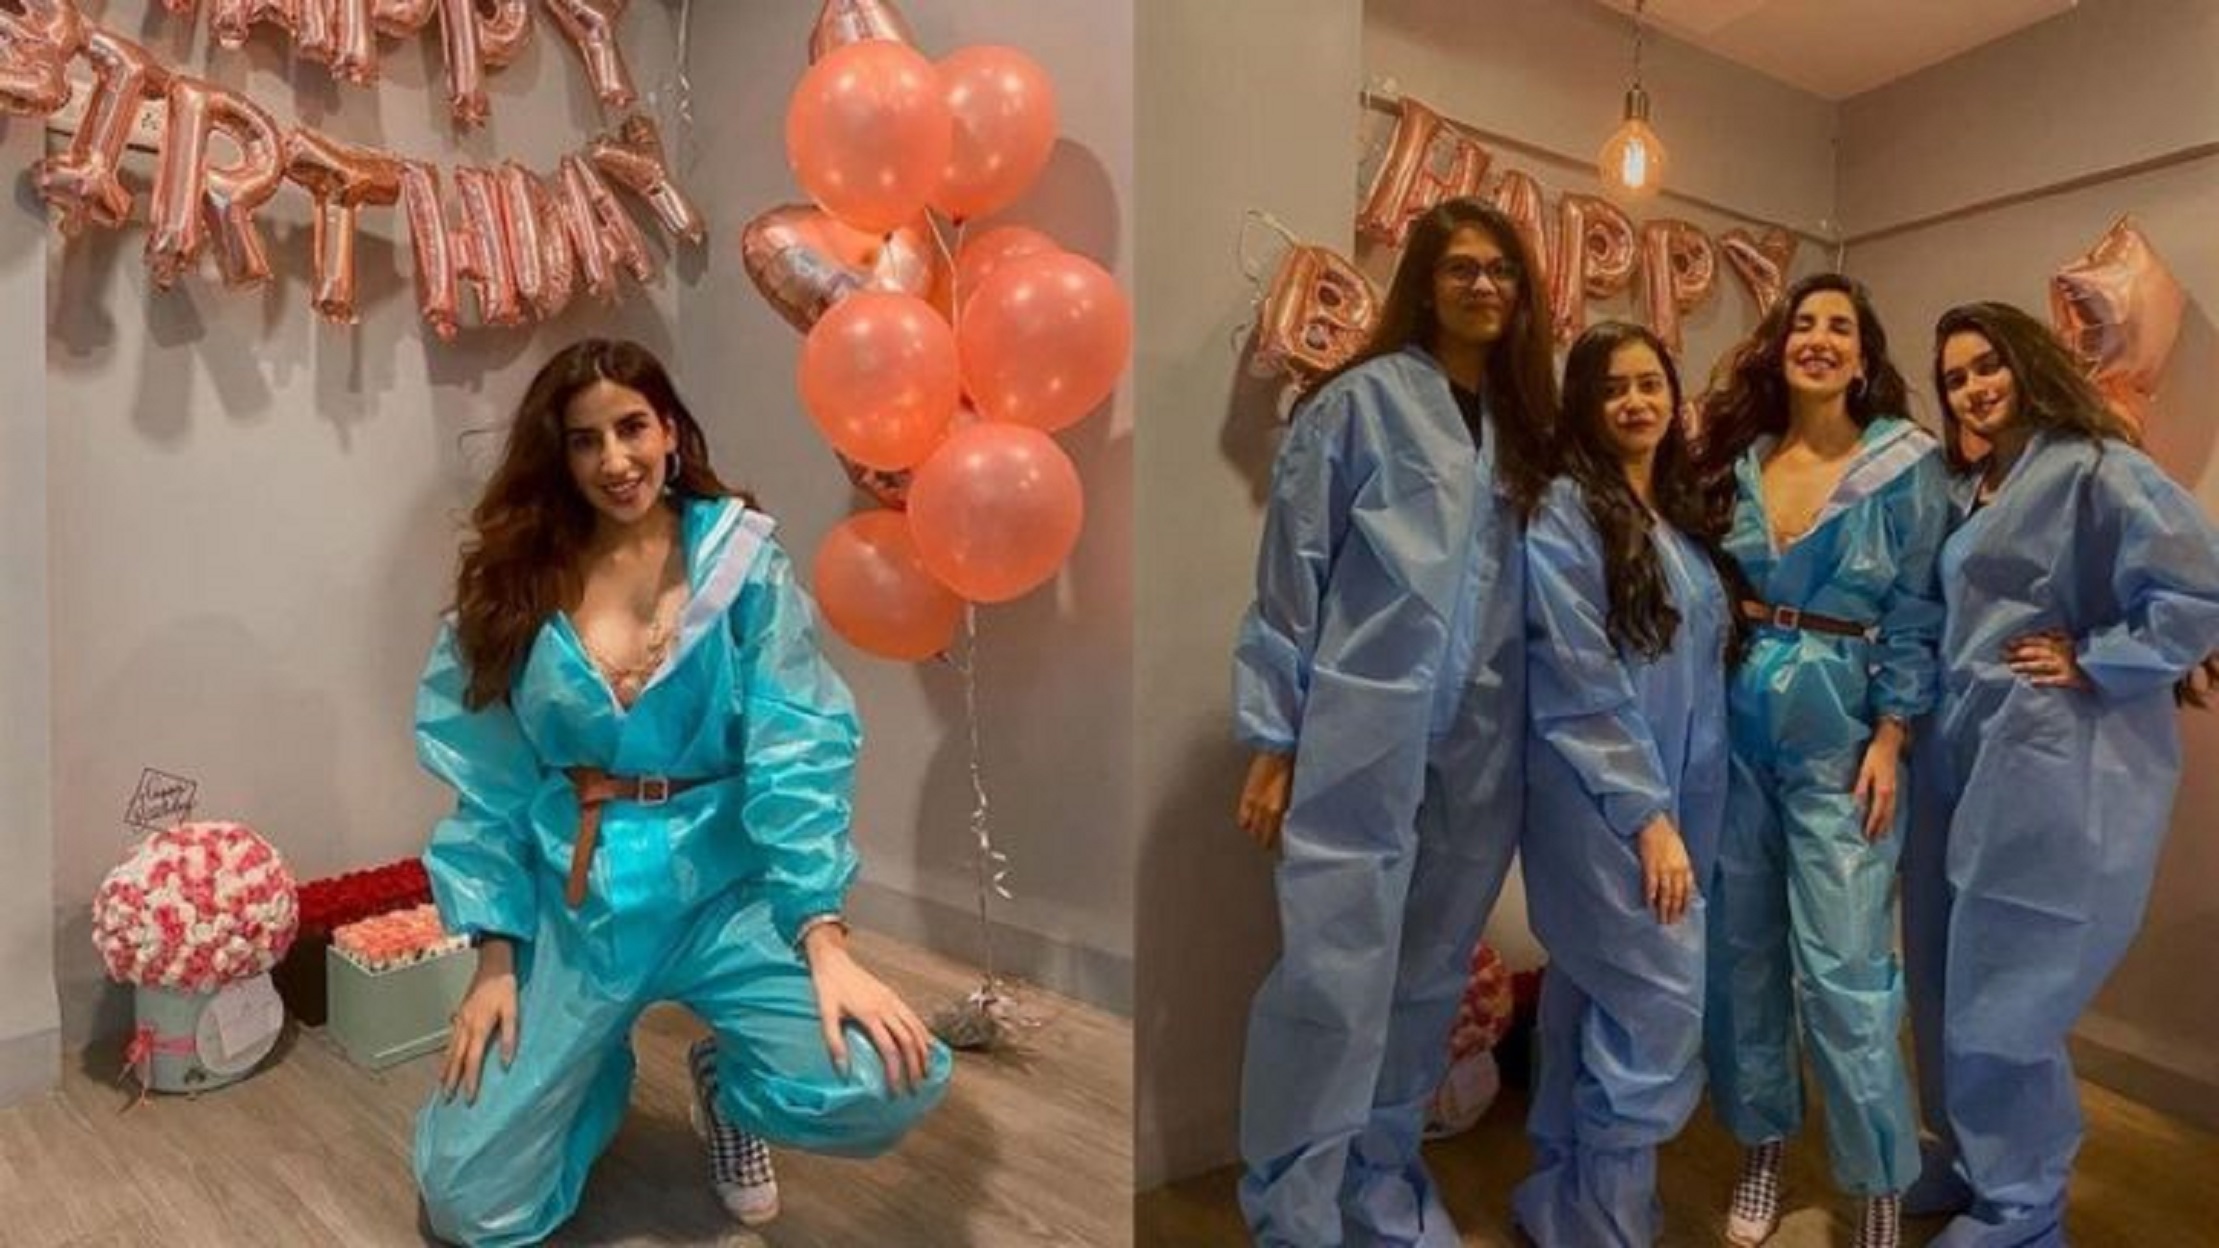 Punjabi Film Actress Parul Gulati Hosted a PPE Kit Themed Party, Receives Online Backlash